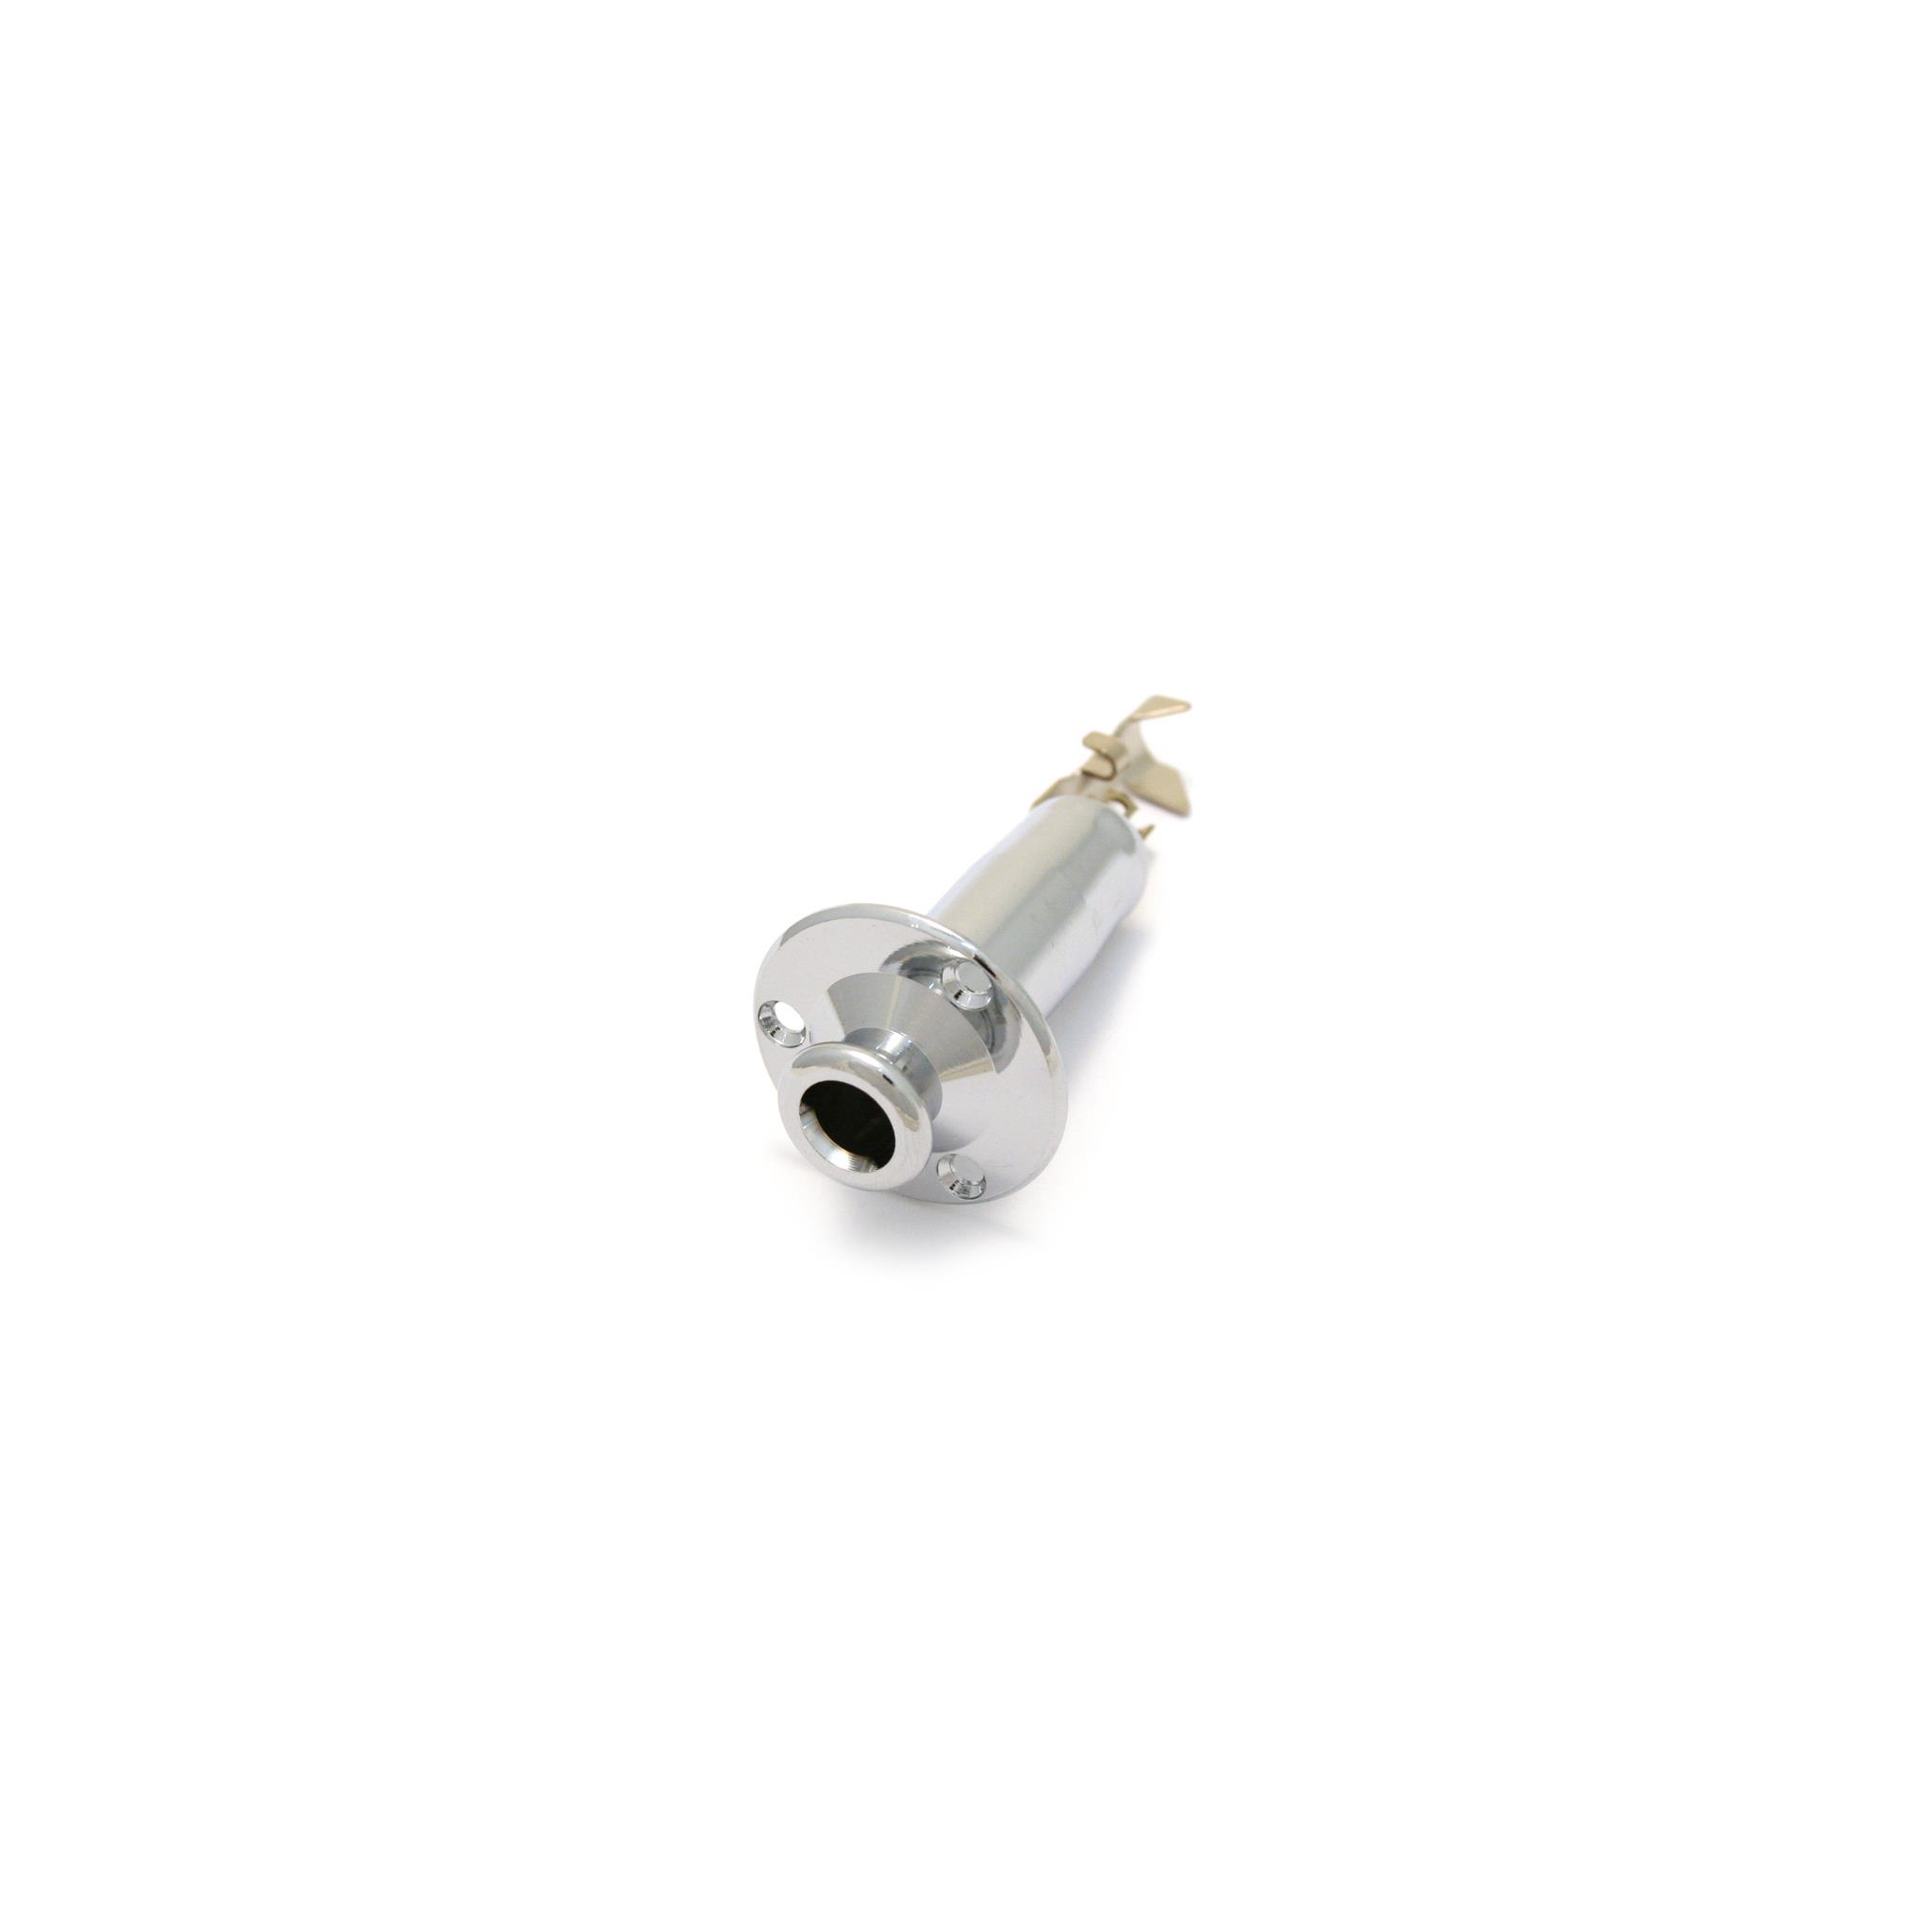 All Parts Chrome Acoustic End Pin Jack